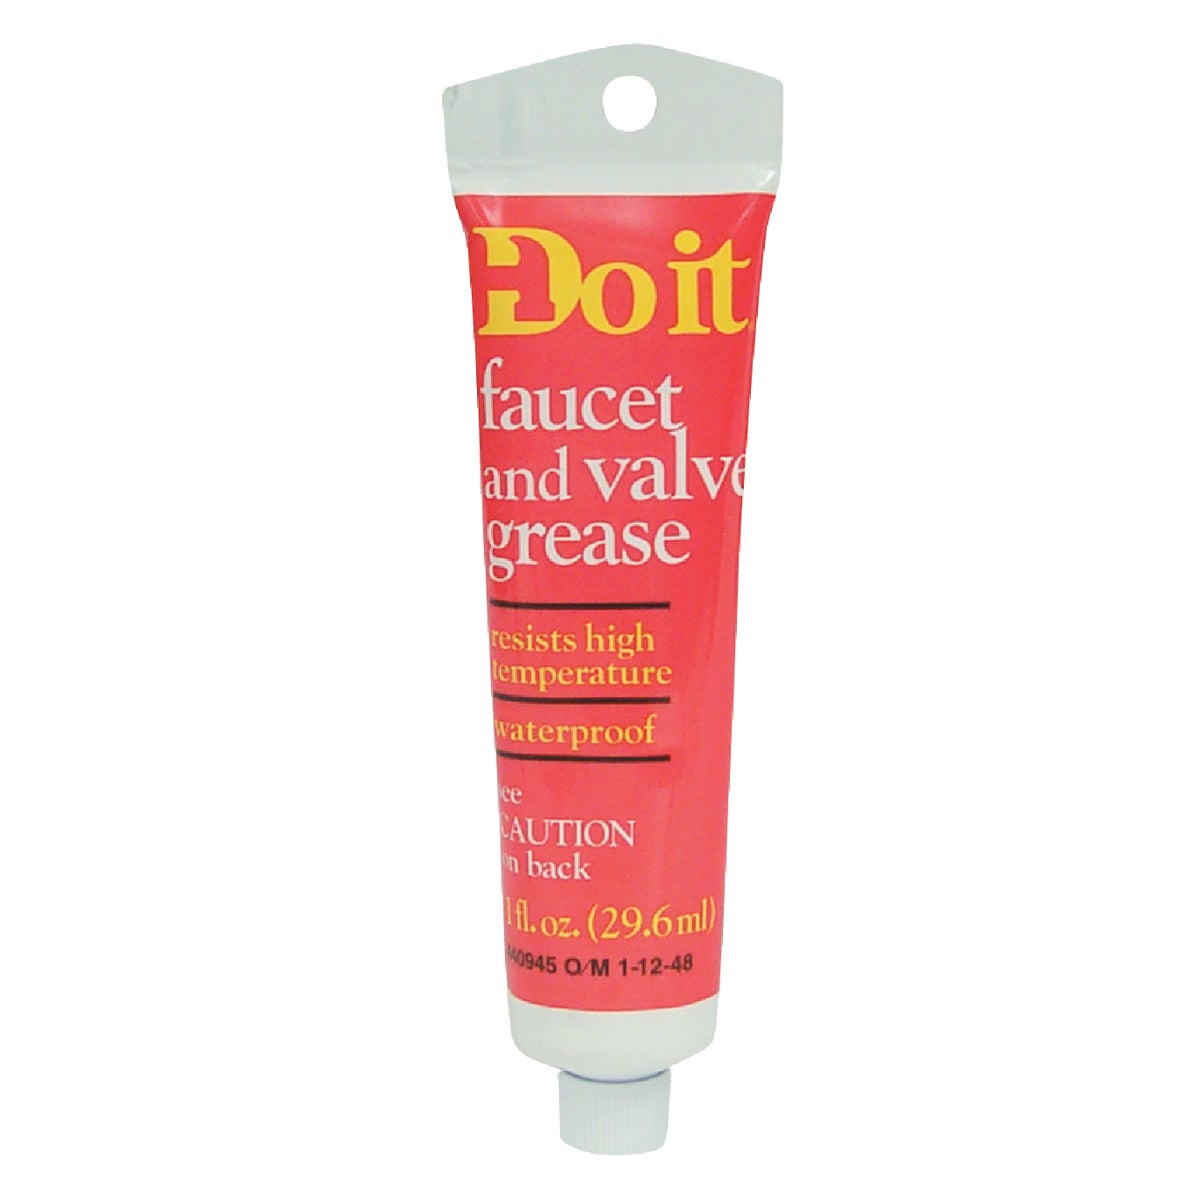 Item 440945, Do it Faucet and Valve Grease is a waterproof grease that resists high 